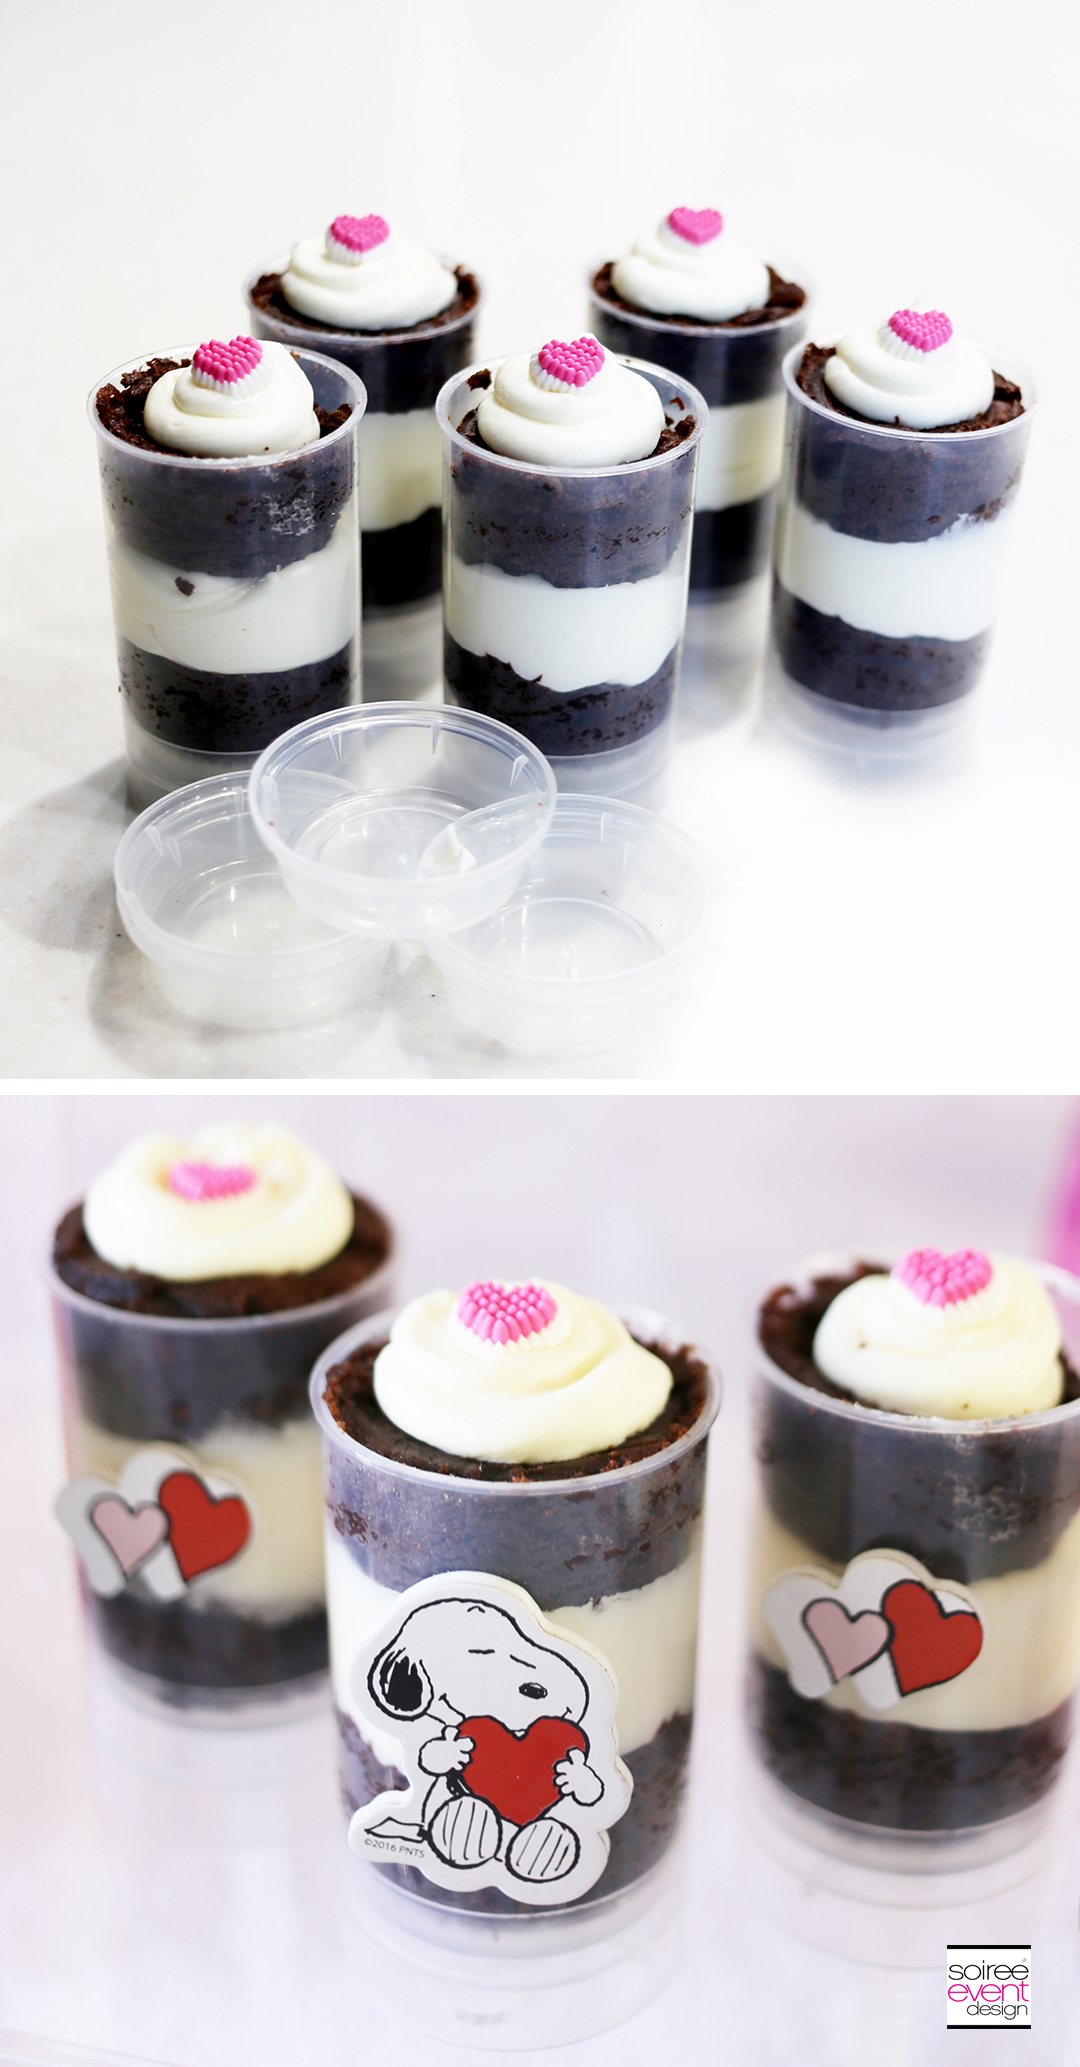 Peanuts Valentines Day Party, Snoopy Brownie Push Cakes